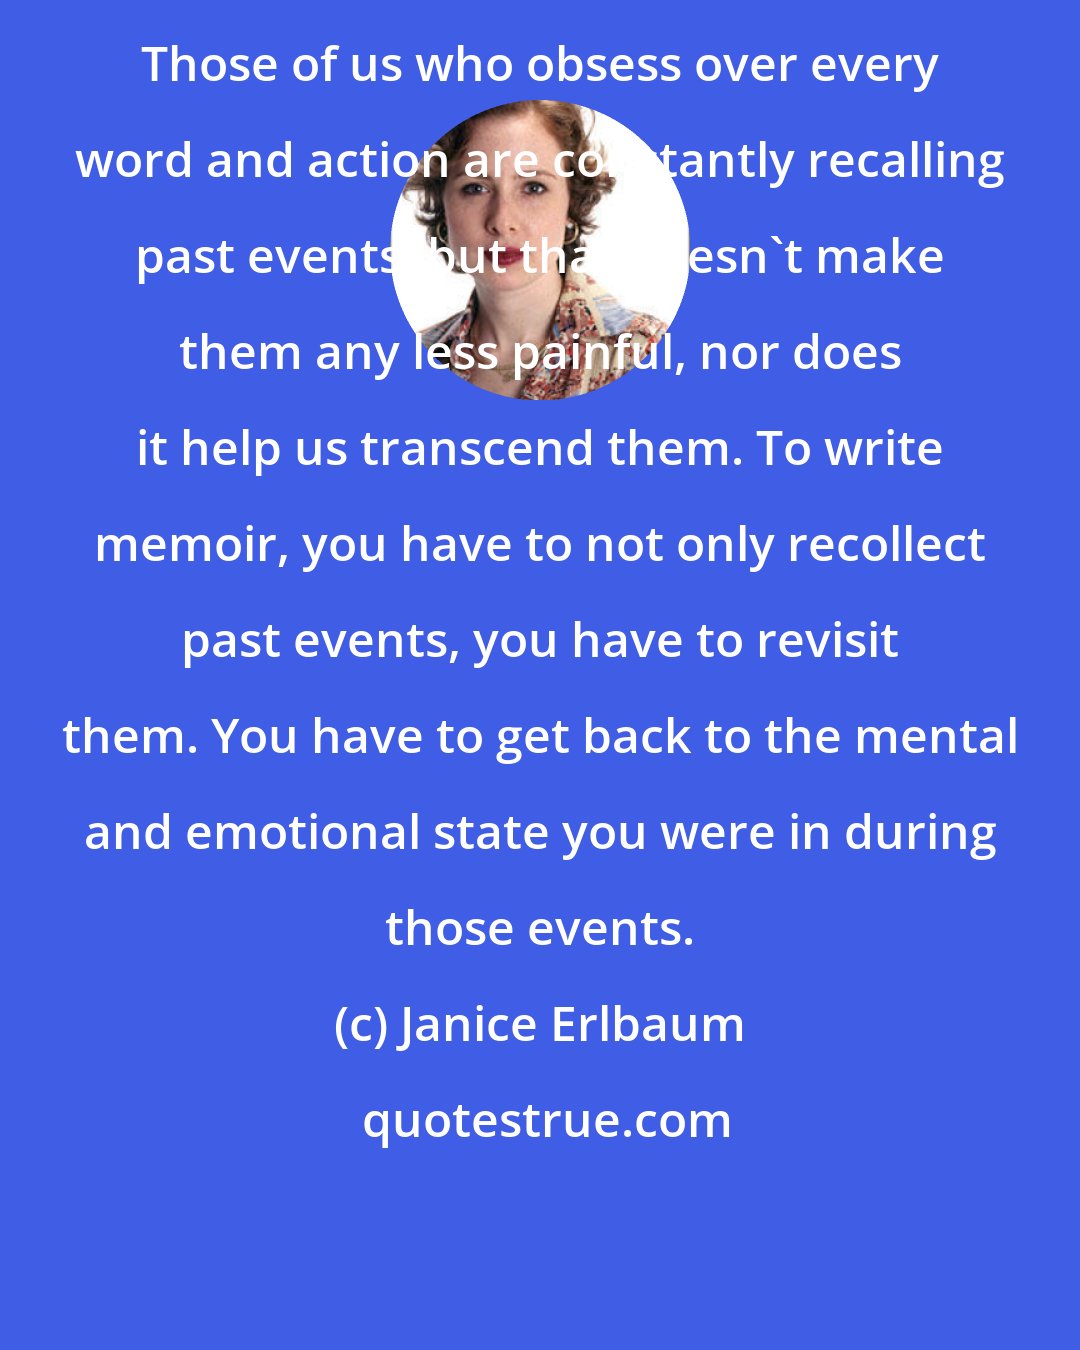 Janice Erlbaum: Those of us who obsess over every word and action are constantly recalling past events, but that doesn't make them any less painful, nor does it help us transcend them. To write memoir, you have to not only recollect past events, you have to revisit them. You have to get back to the mental and emotional state you were in during those events.